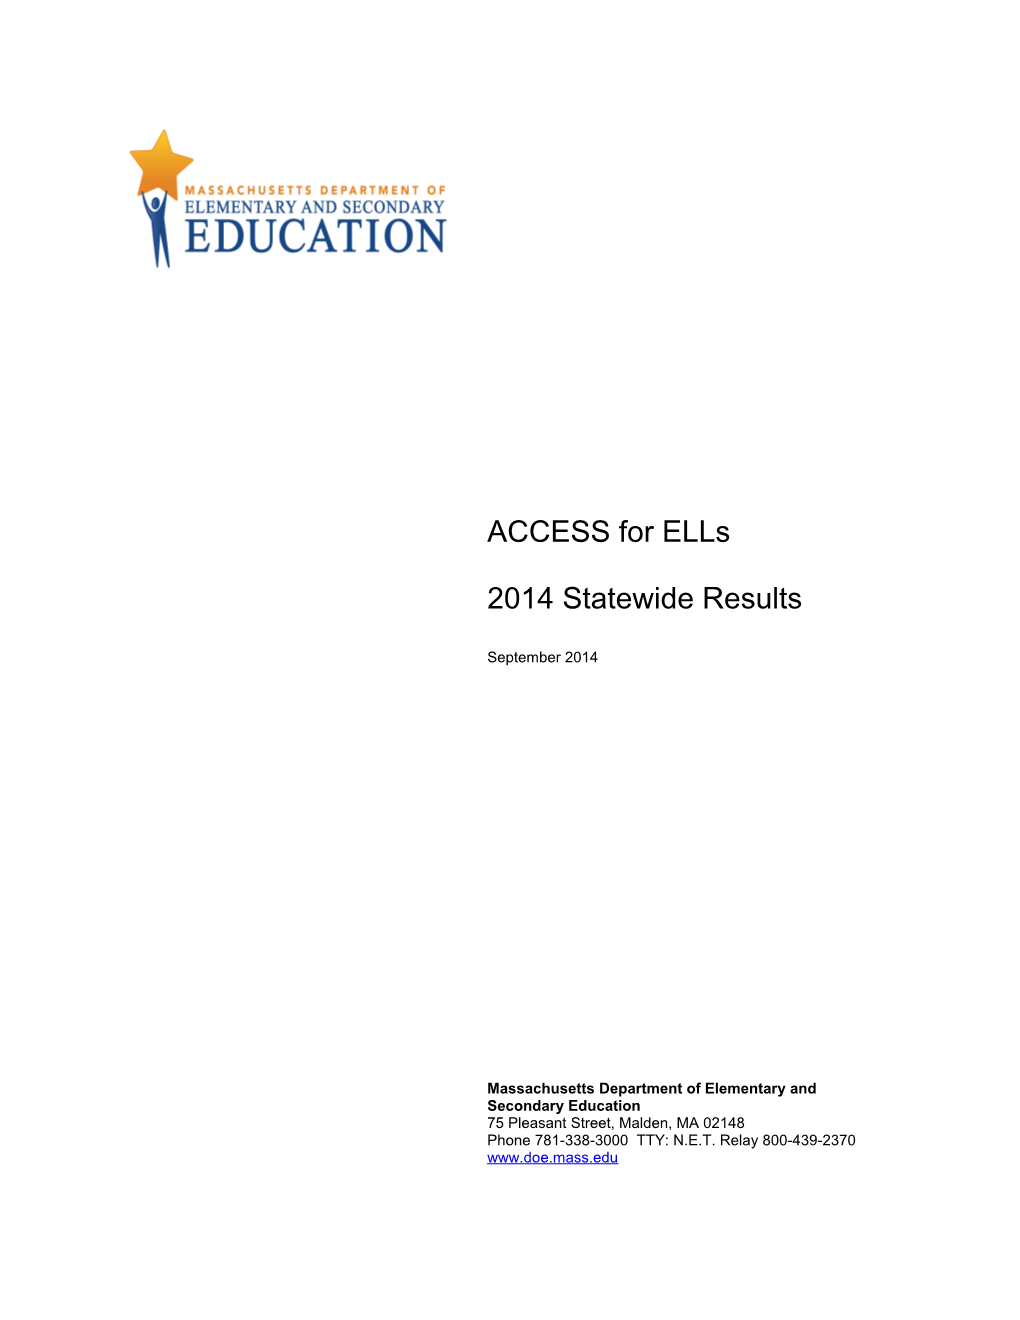 ACCESS for Ells 2014 Statewide Results